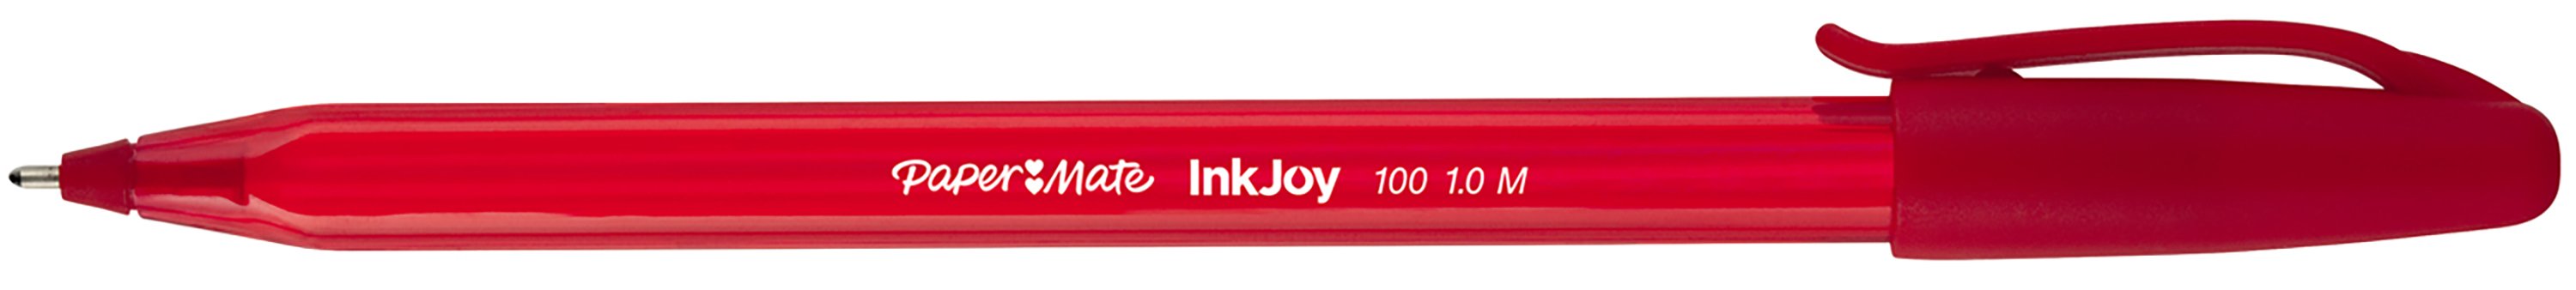 CF 60 PZ PENNA PAPERMATE INKJOY 100 CAP ROSSO